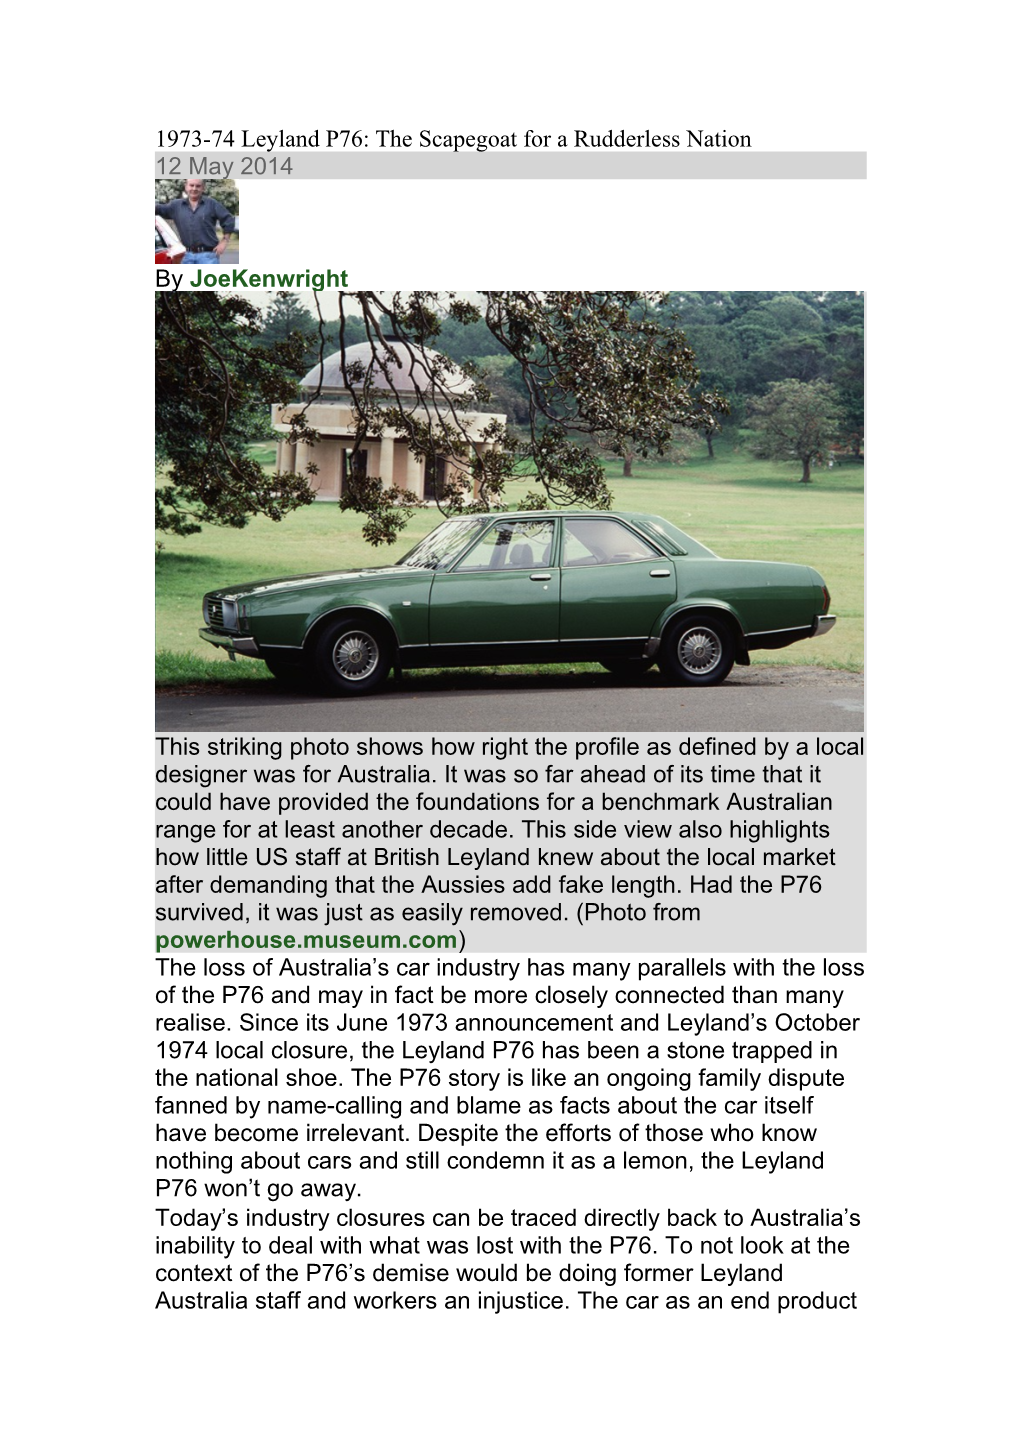 1973-74 Leyland P76: the Scapegoat for a Rudderless Nation